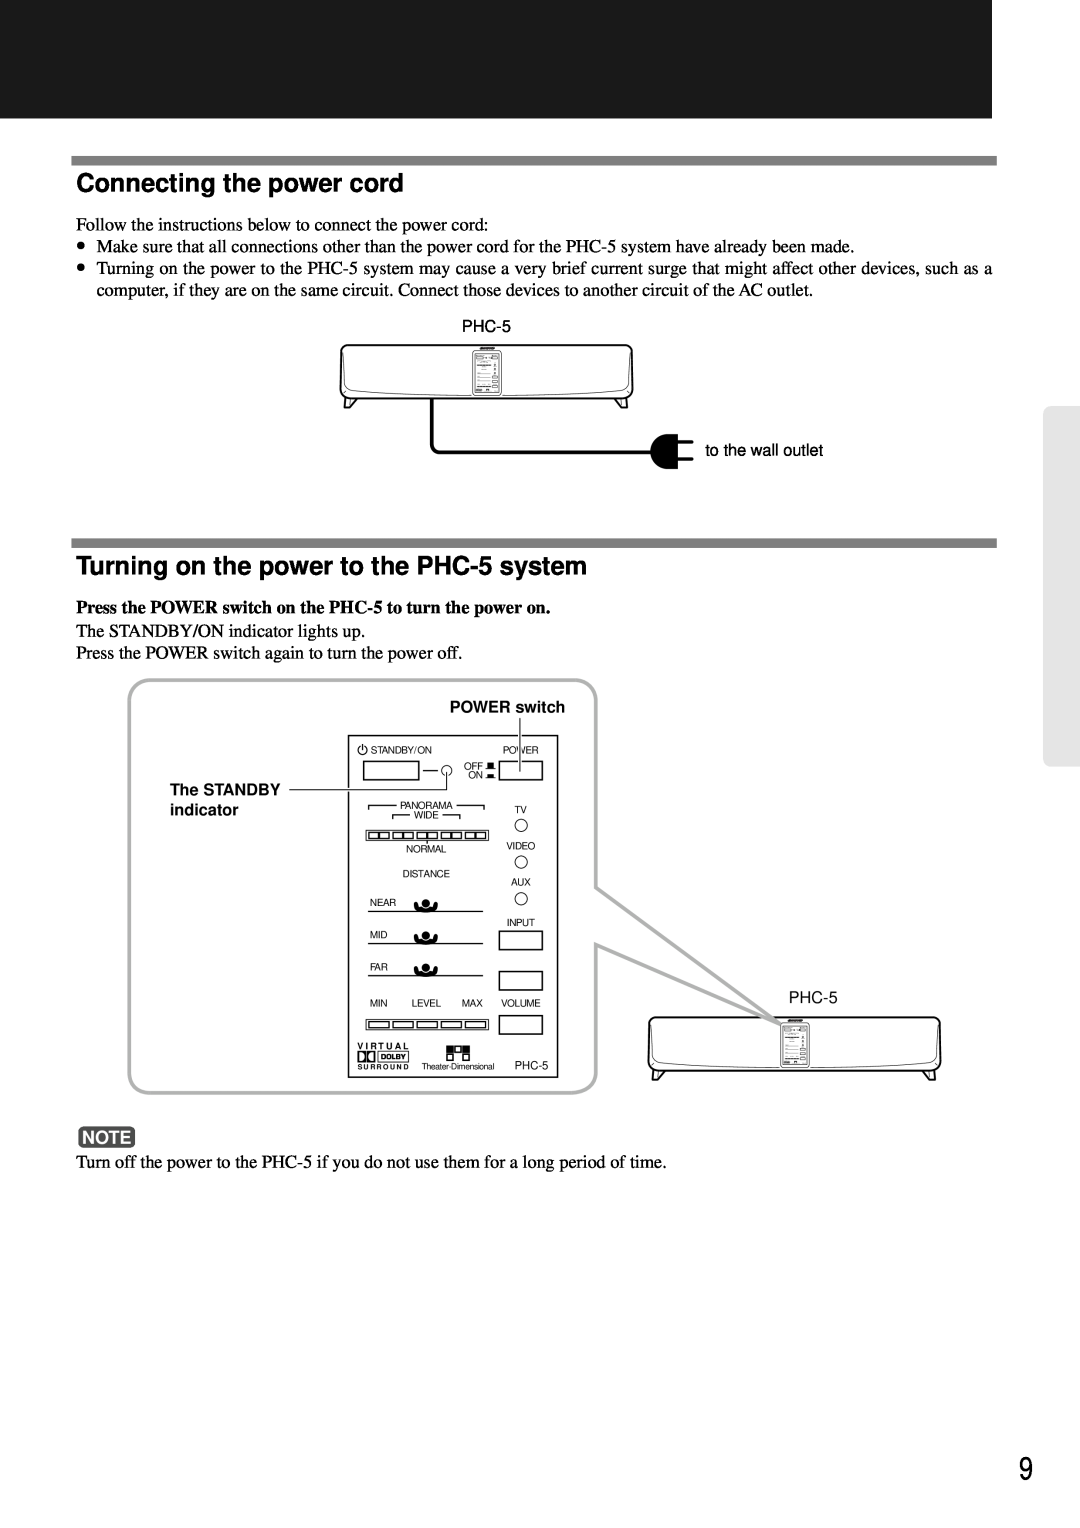 Onkyo instruction manual Connecting the power cord, Turning on the power to the PHC-5system 